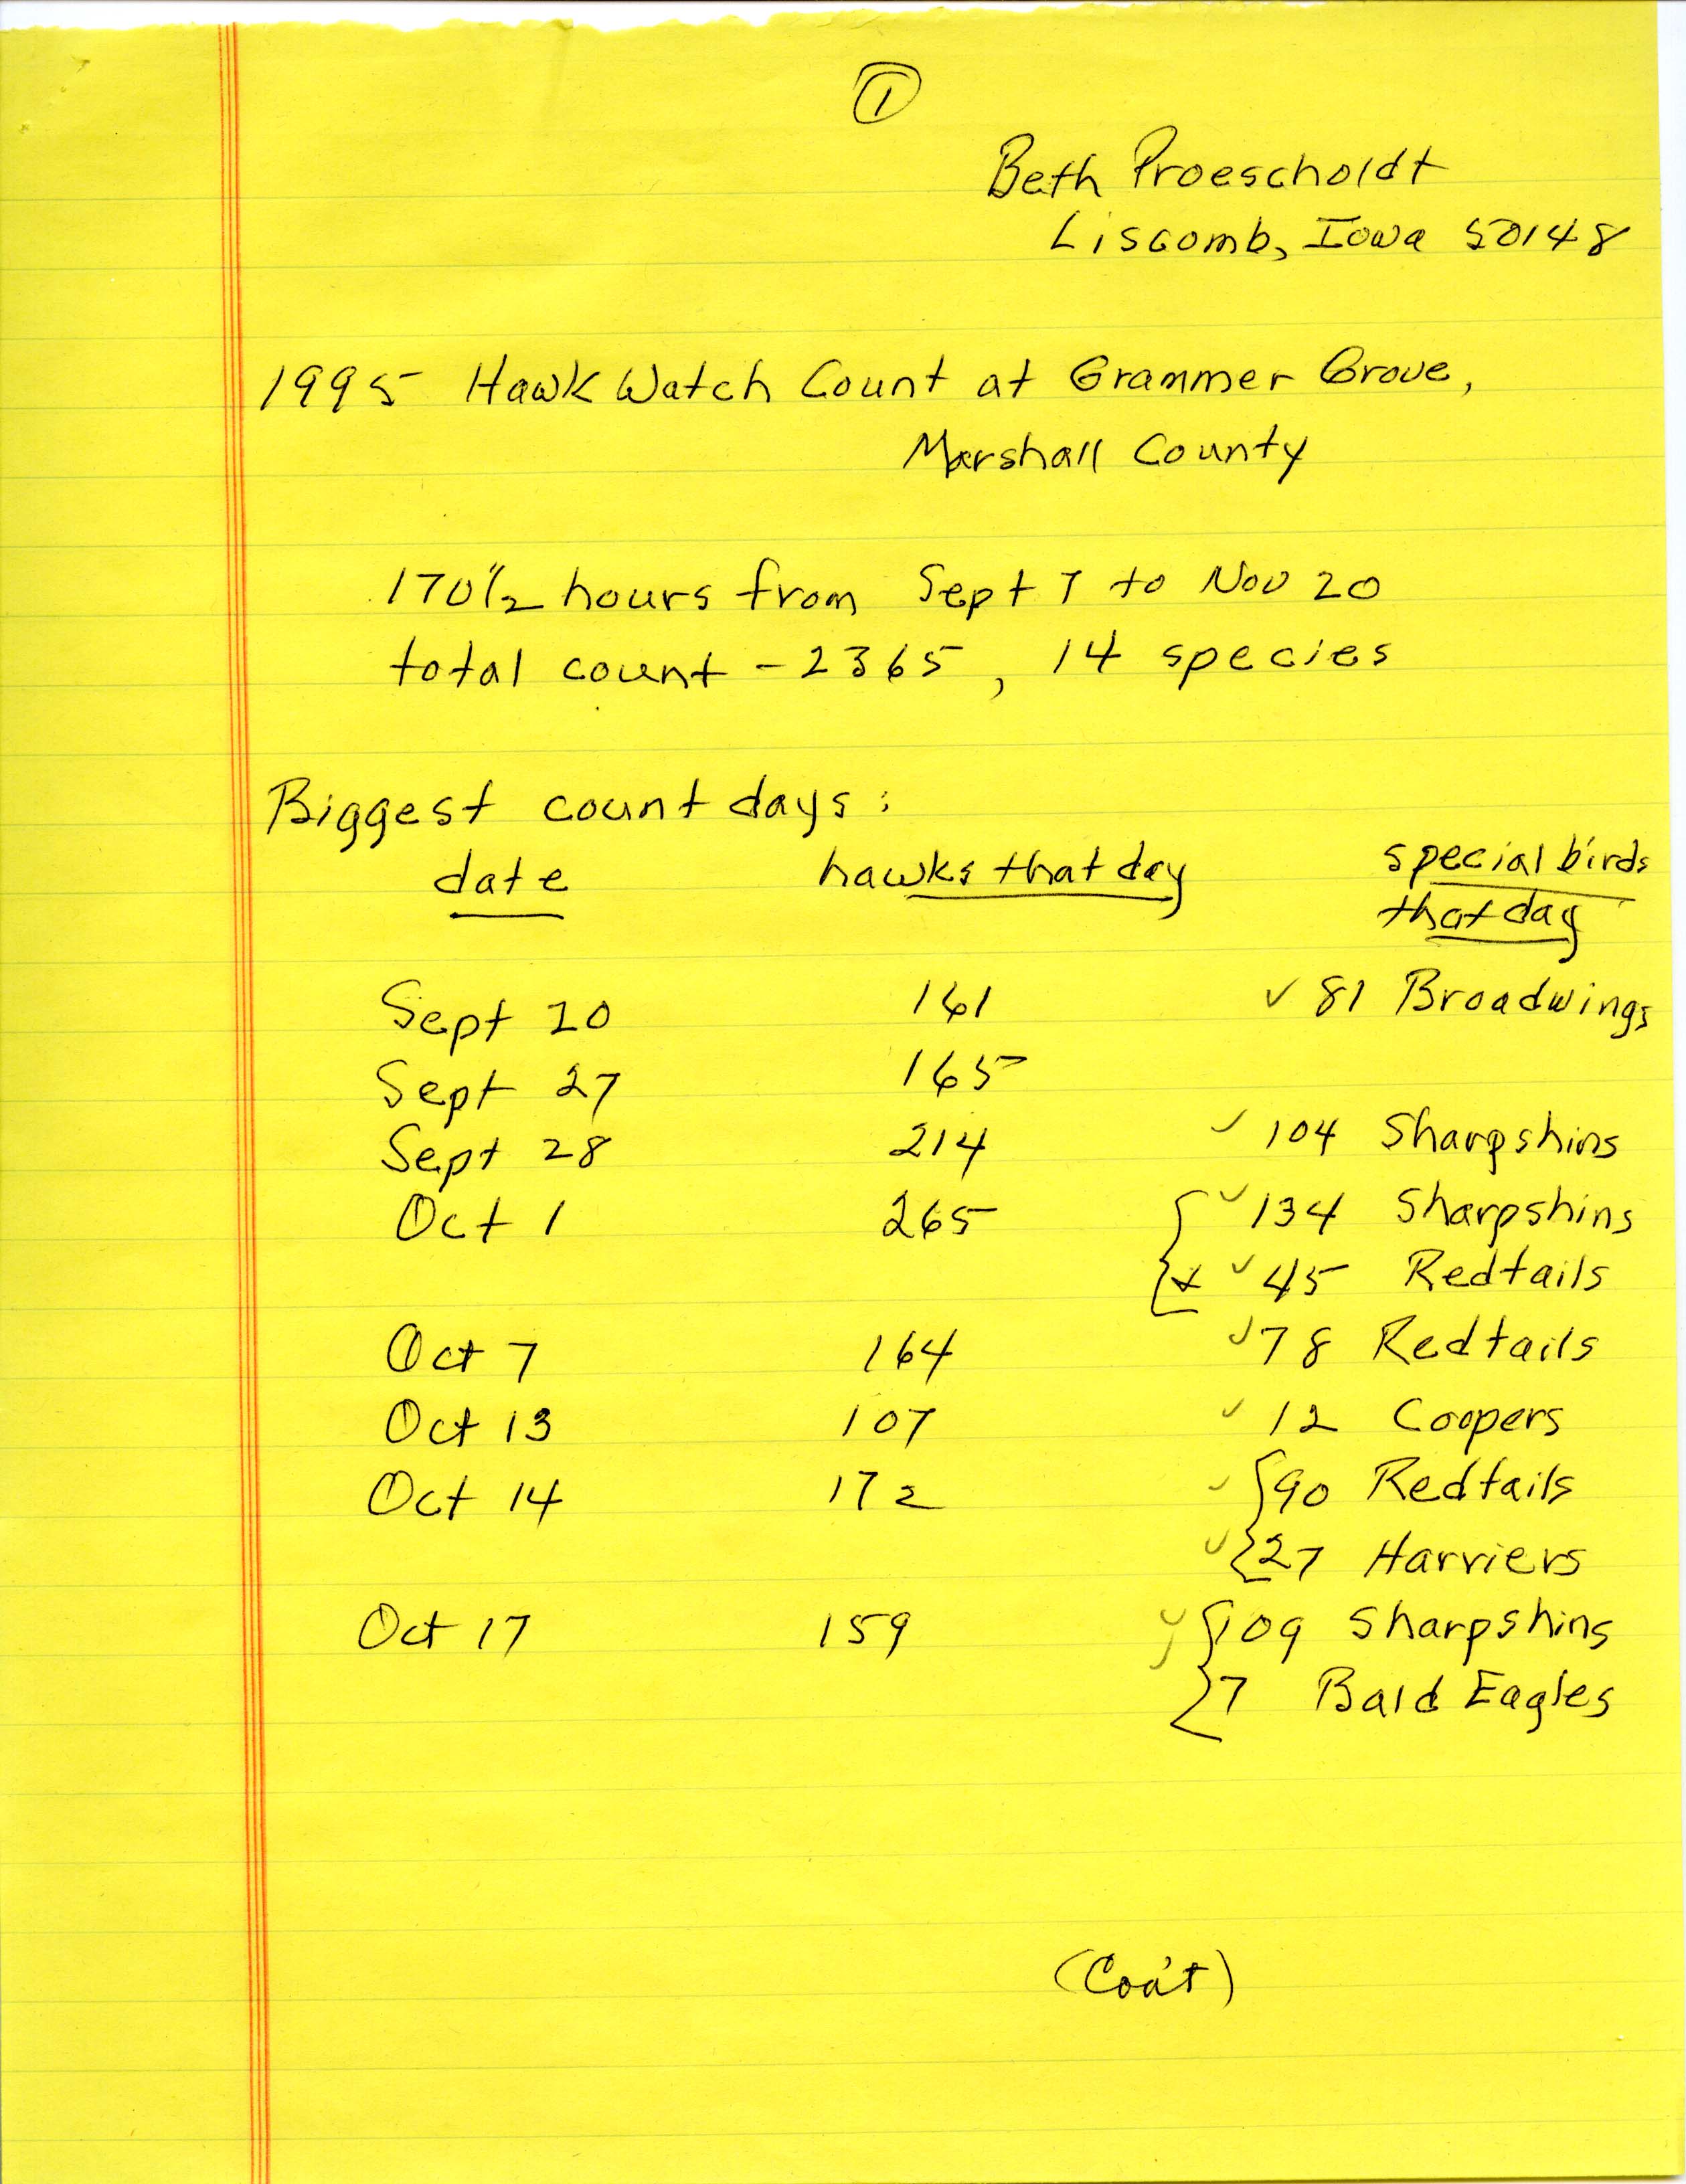 Hawk watch field notes contributed by Beth Proescholdt, fall 1995